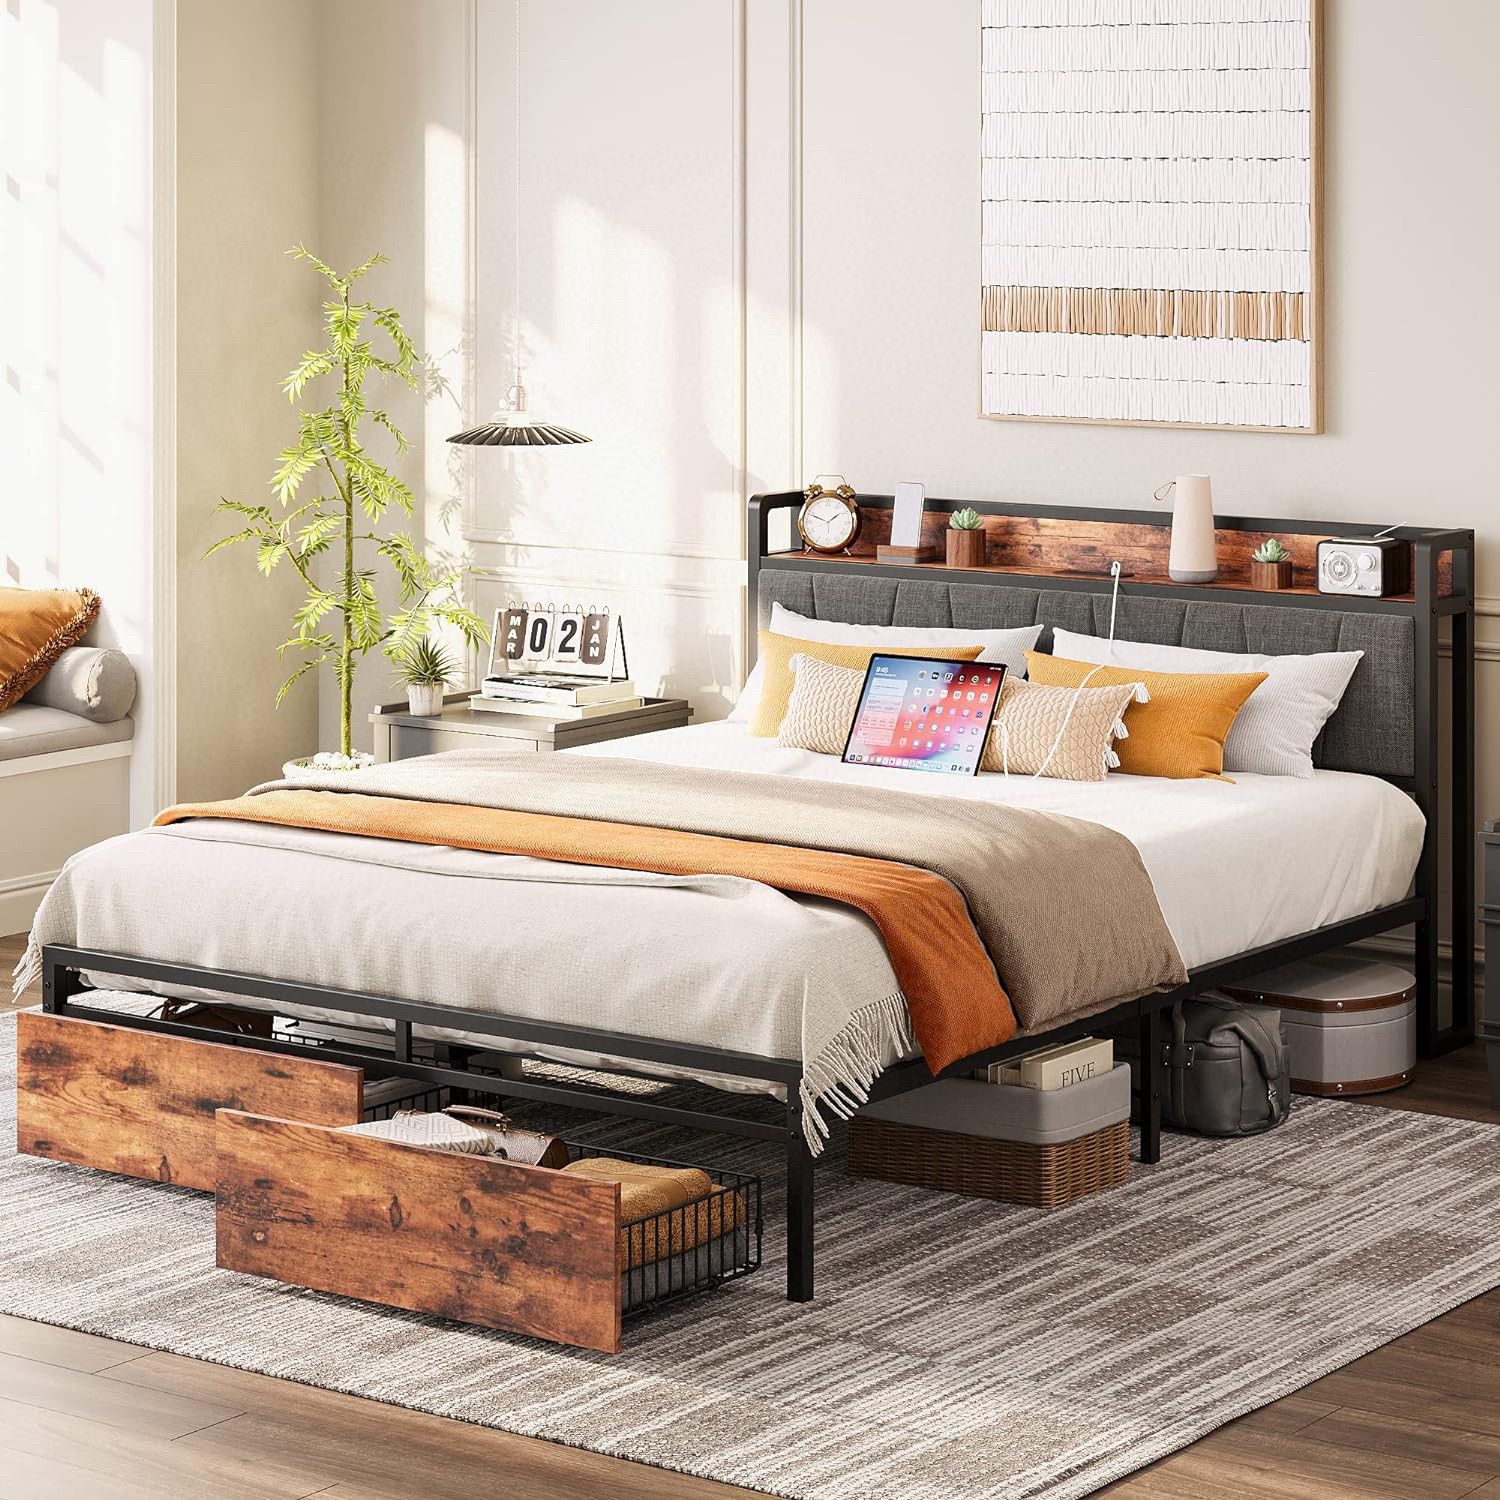 Queen Bed Frame, Storage Headboard with Charging Station, Platform Bed with Drawers, CAPACITY 2200lb